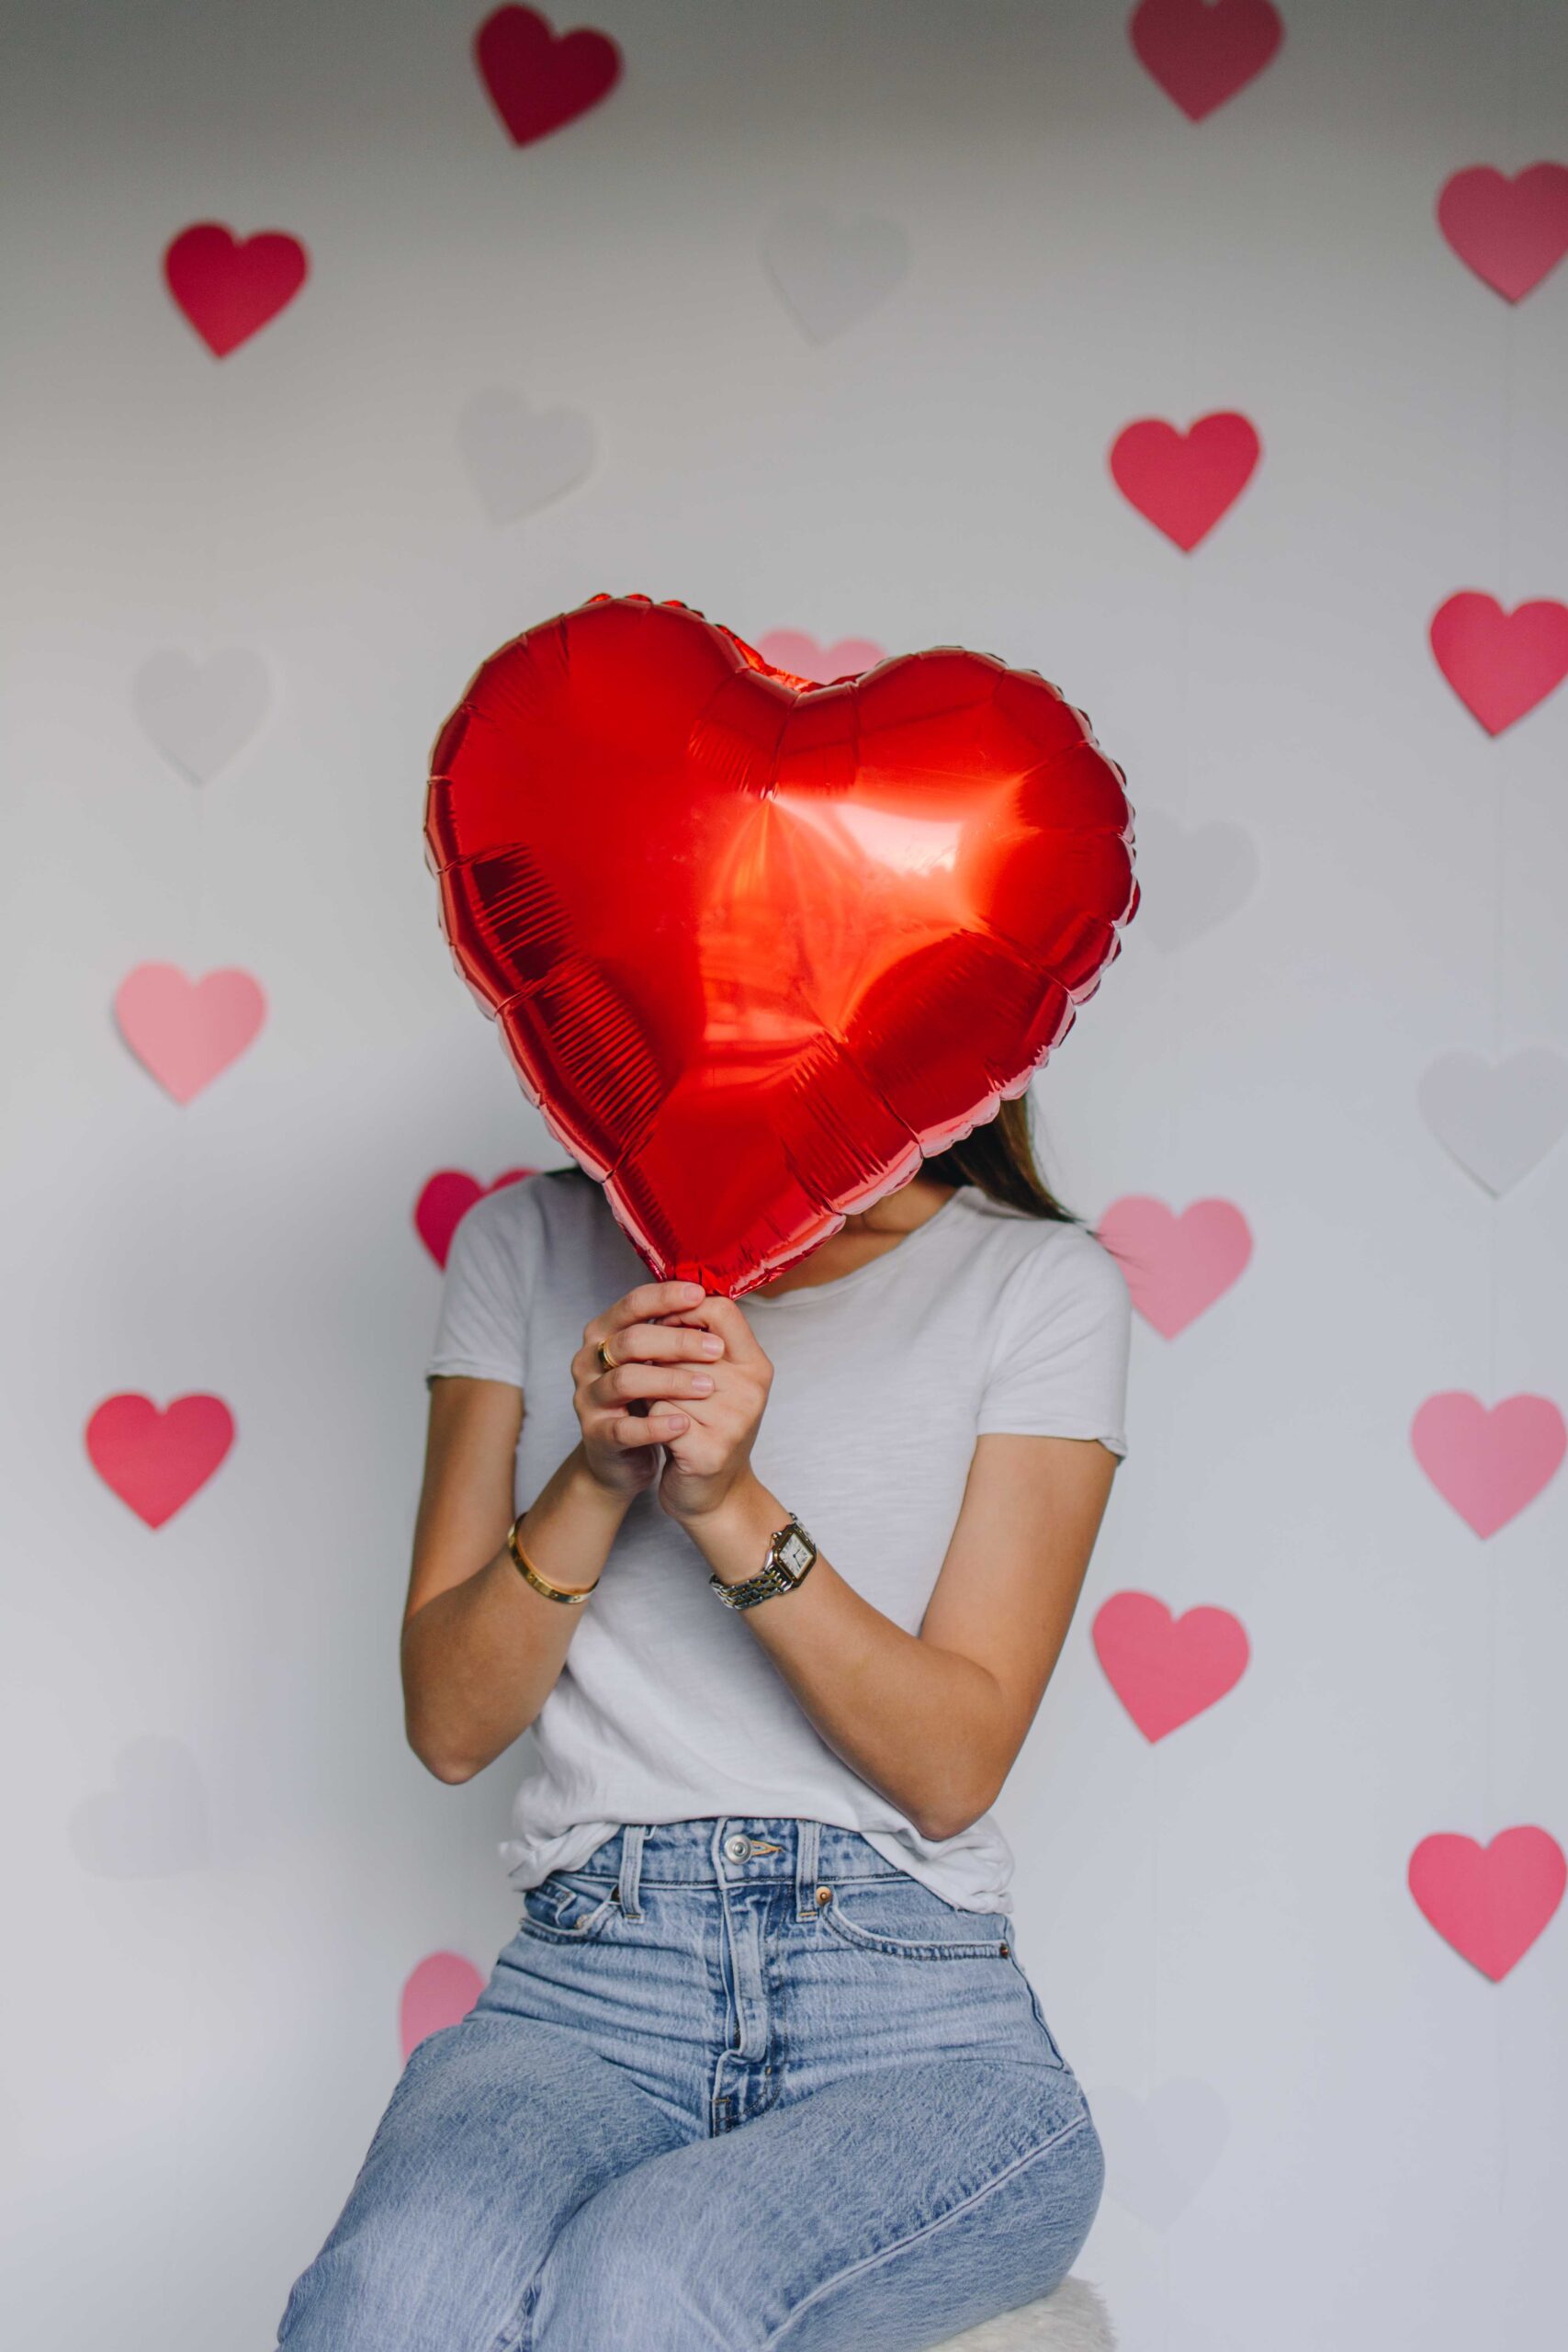 Arizona blogger Demi Bang does a Valentine's Day themed photoshoot with a red balloon.